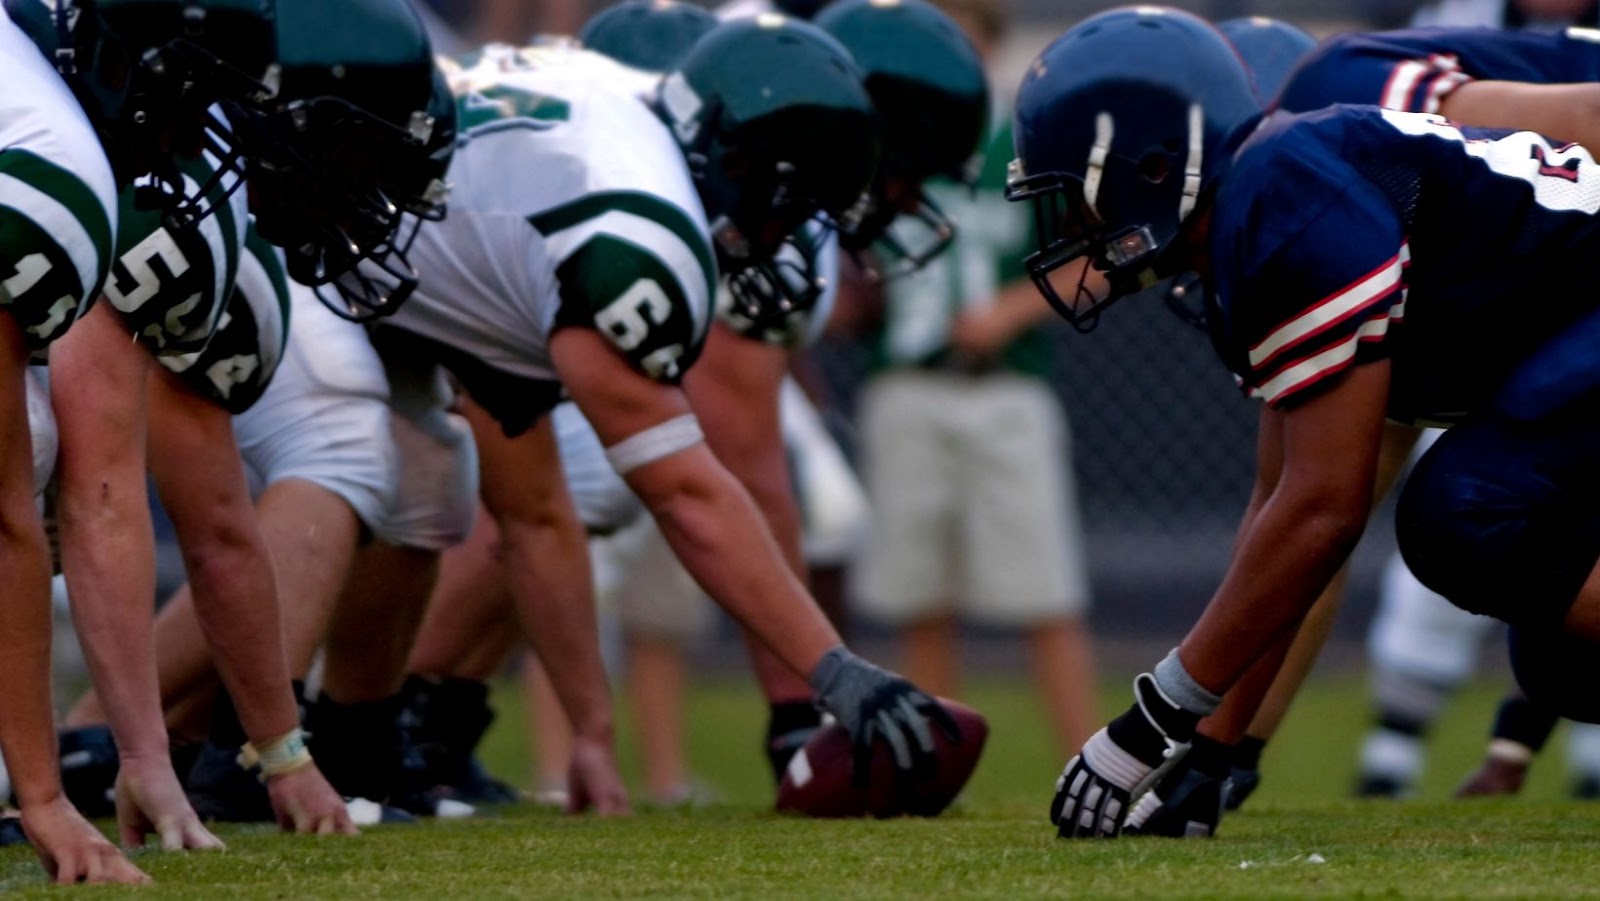 Scrimmages Help Players Improve Their Skills and Strategies